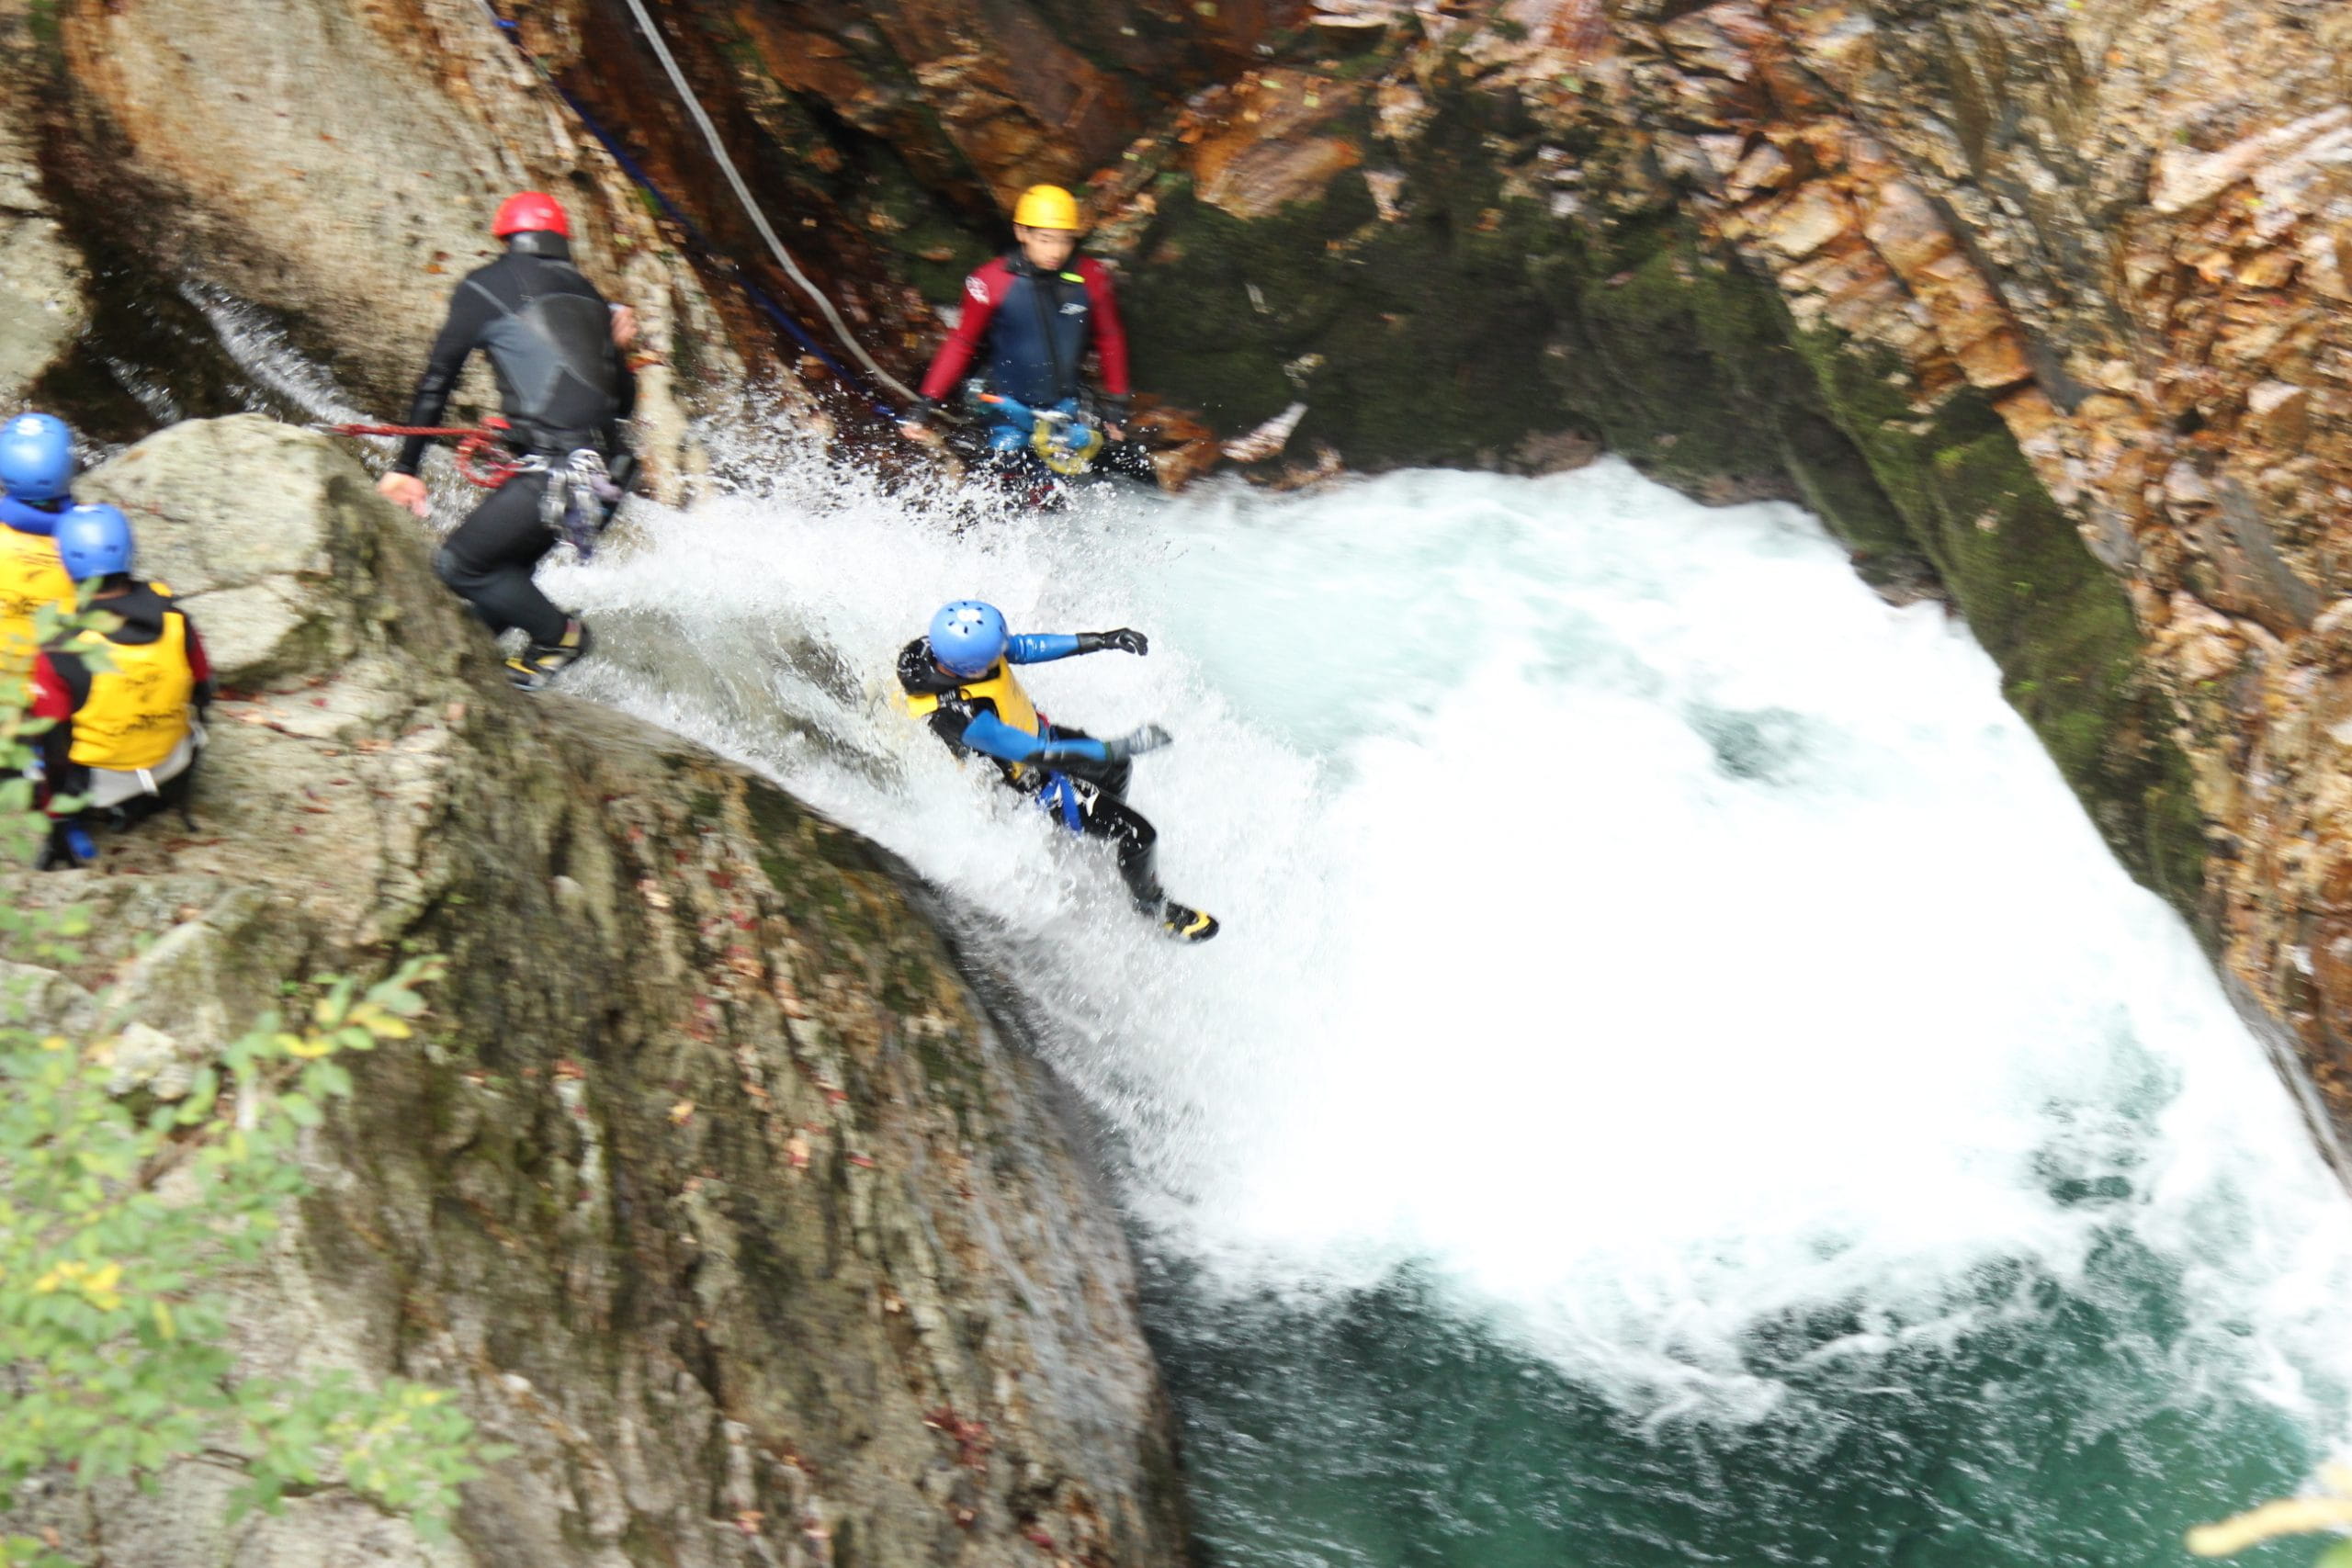 Feel the thrill of unbridled nature while canyoning and rafting in Minakami.